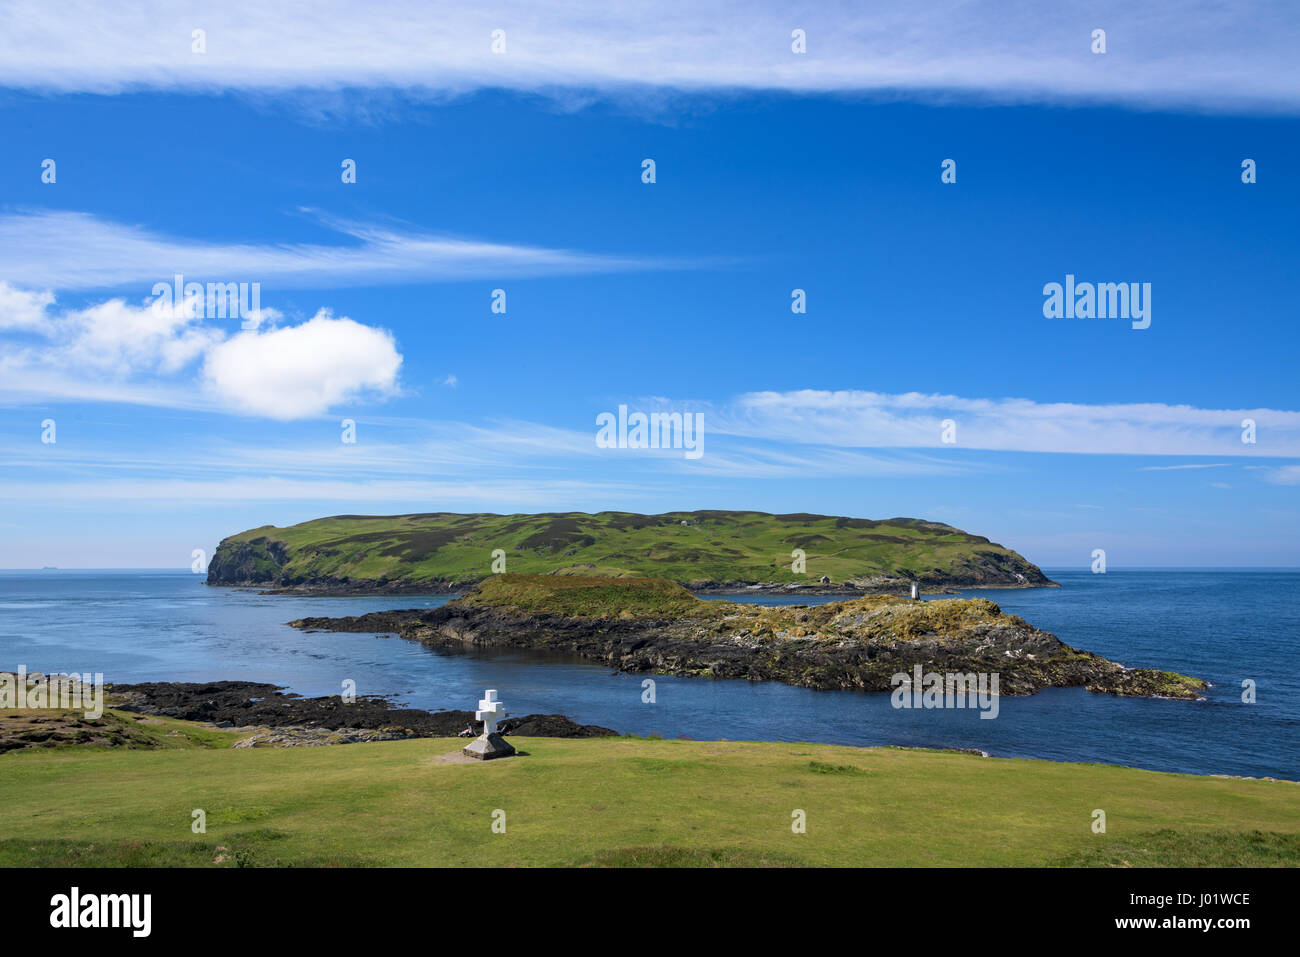 The Calf of Man & Kitterland from The Sound, Isle of Man. Stock Photo